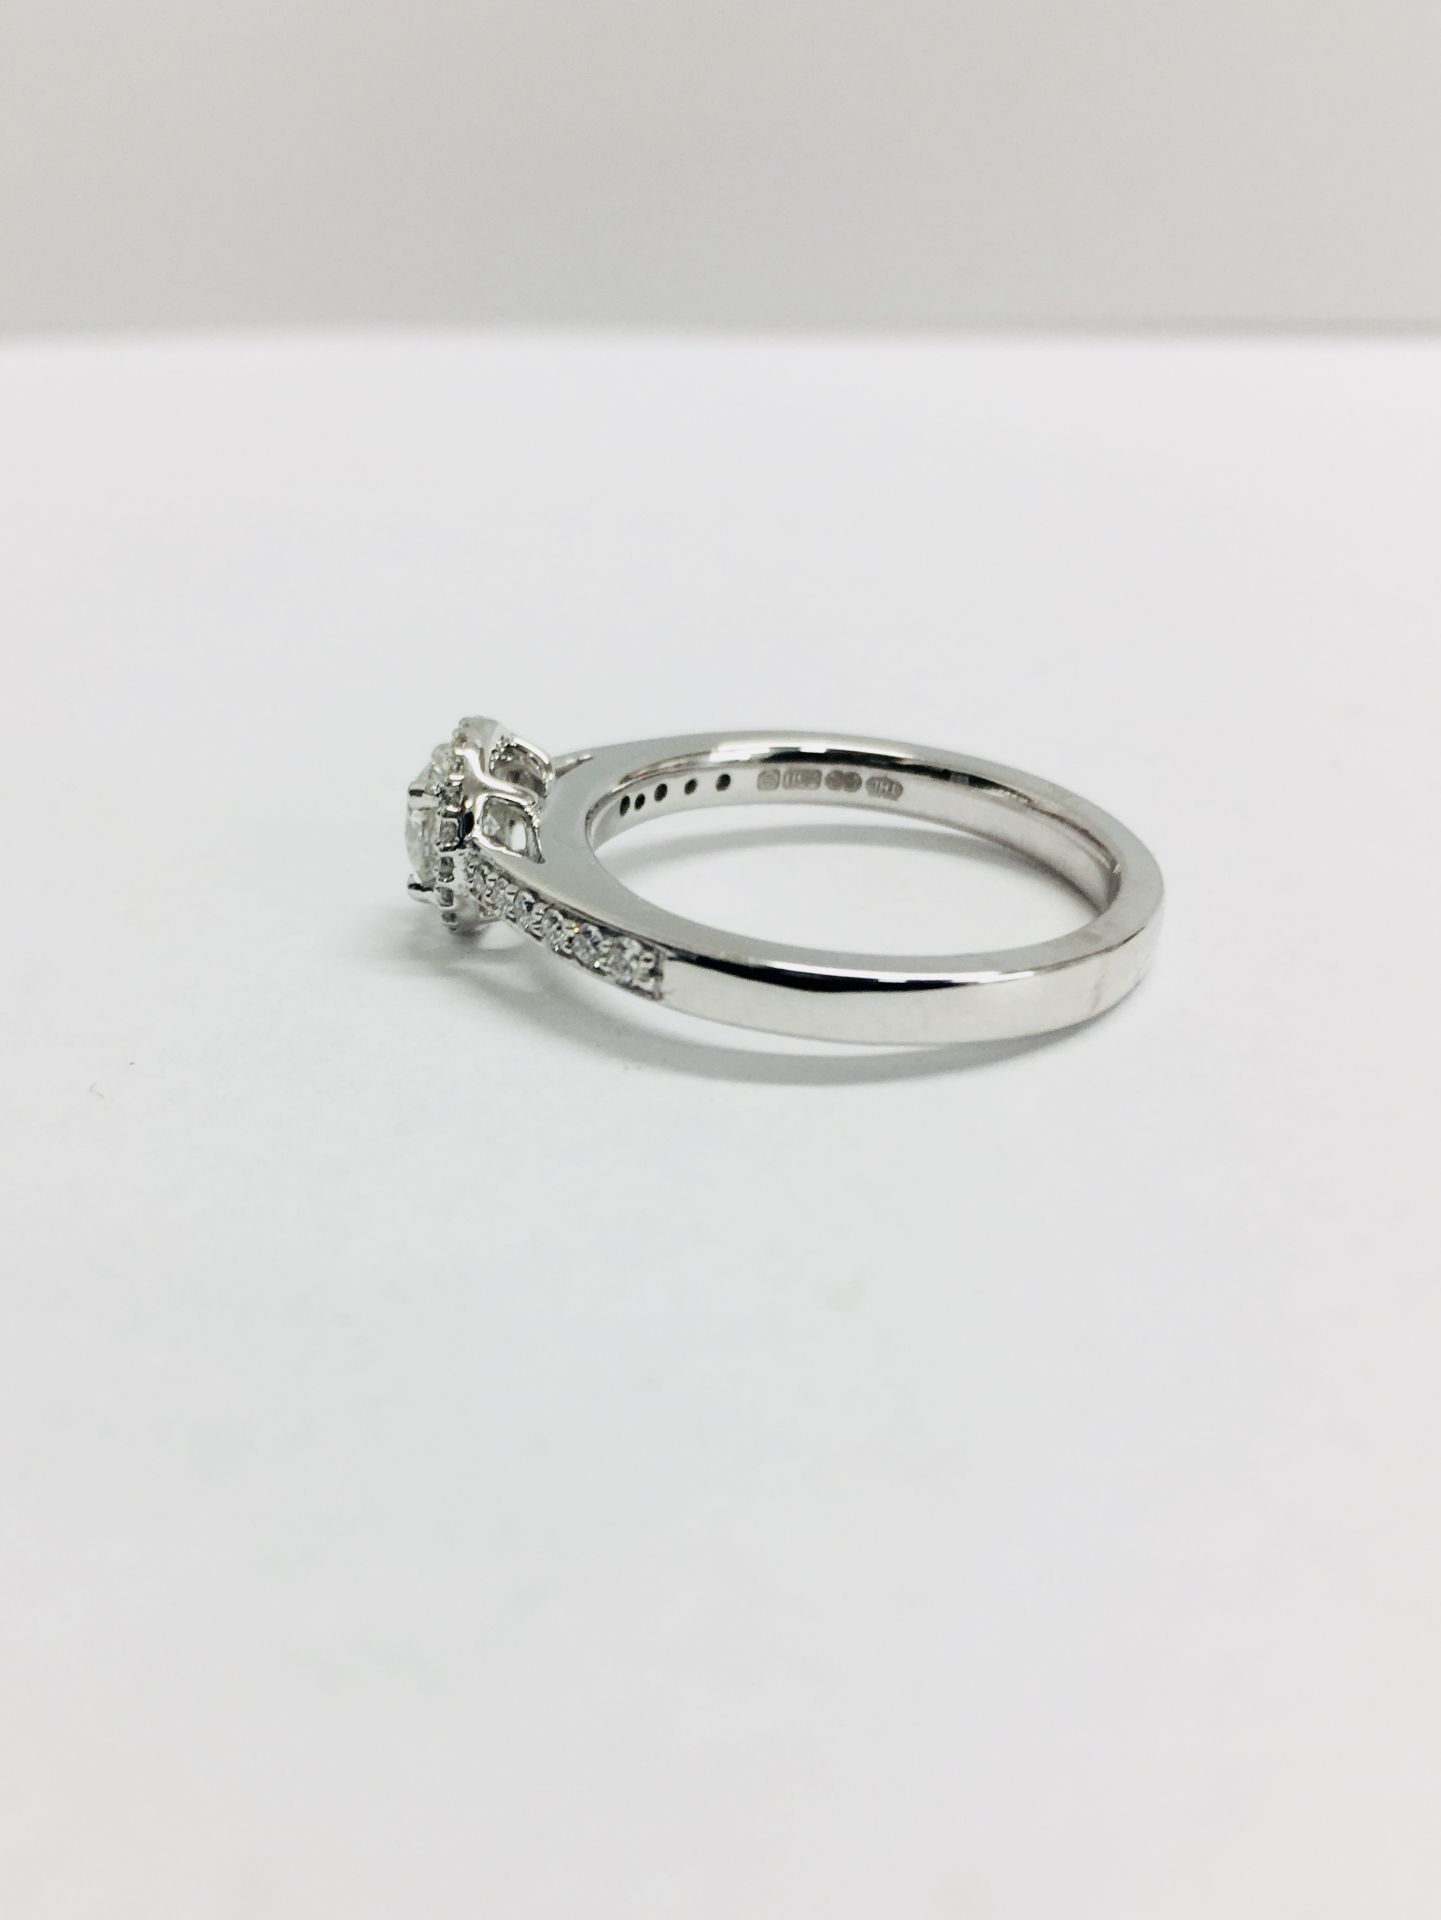 18ct white gold Halo style solitaire ring,0.30ct natural diamond,0.28ct h Colour si diamonds - Image 2 of 6